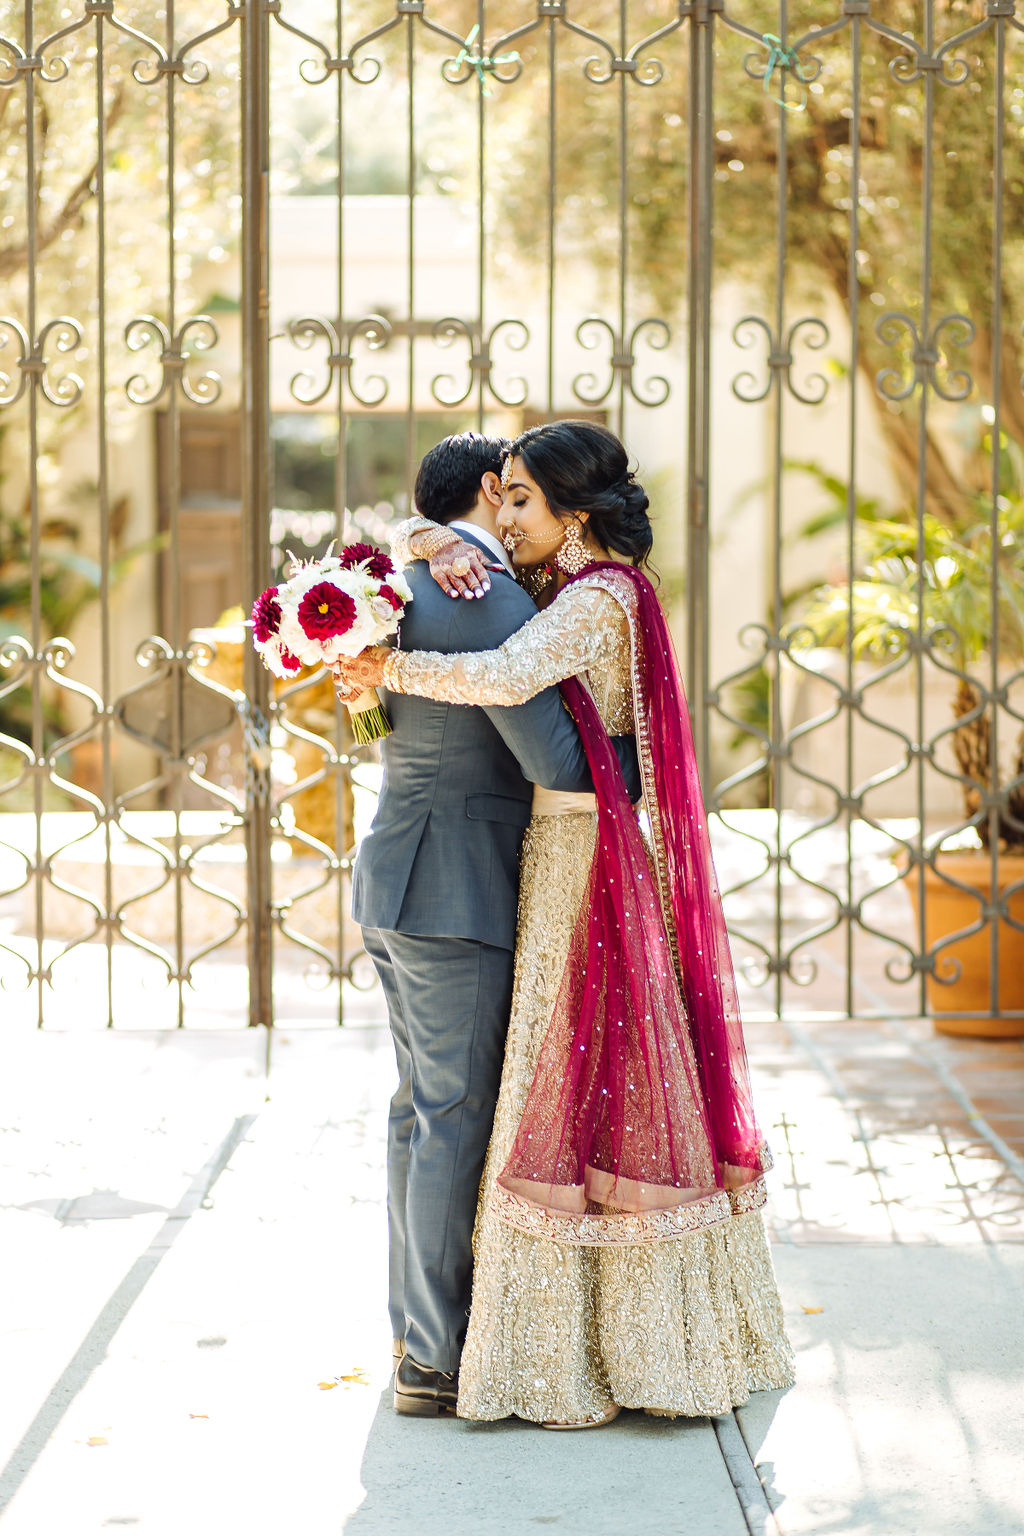 bride wearing embellished golden wedding saree and groom in dark grey suit with maroon tie embrace at Los Angeles River and Garden Center